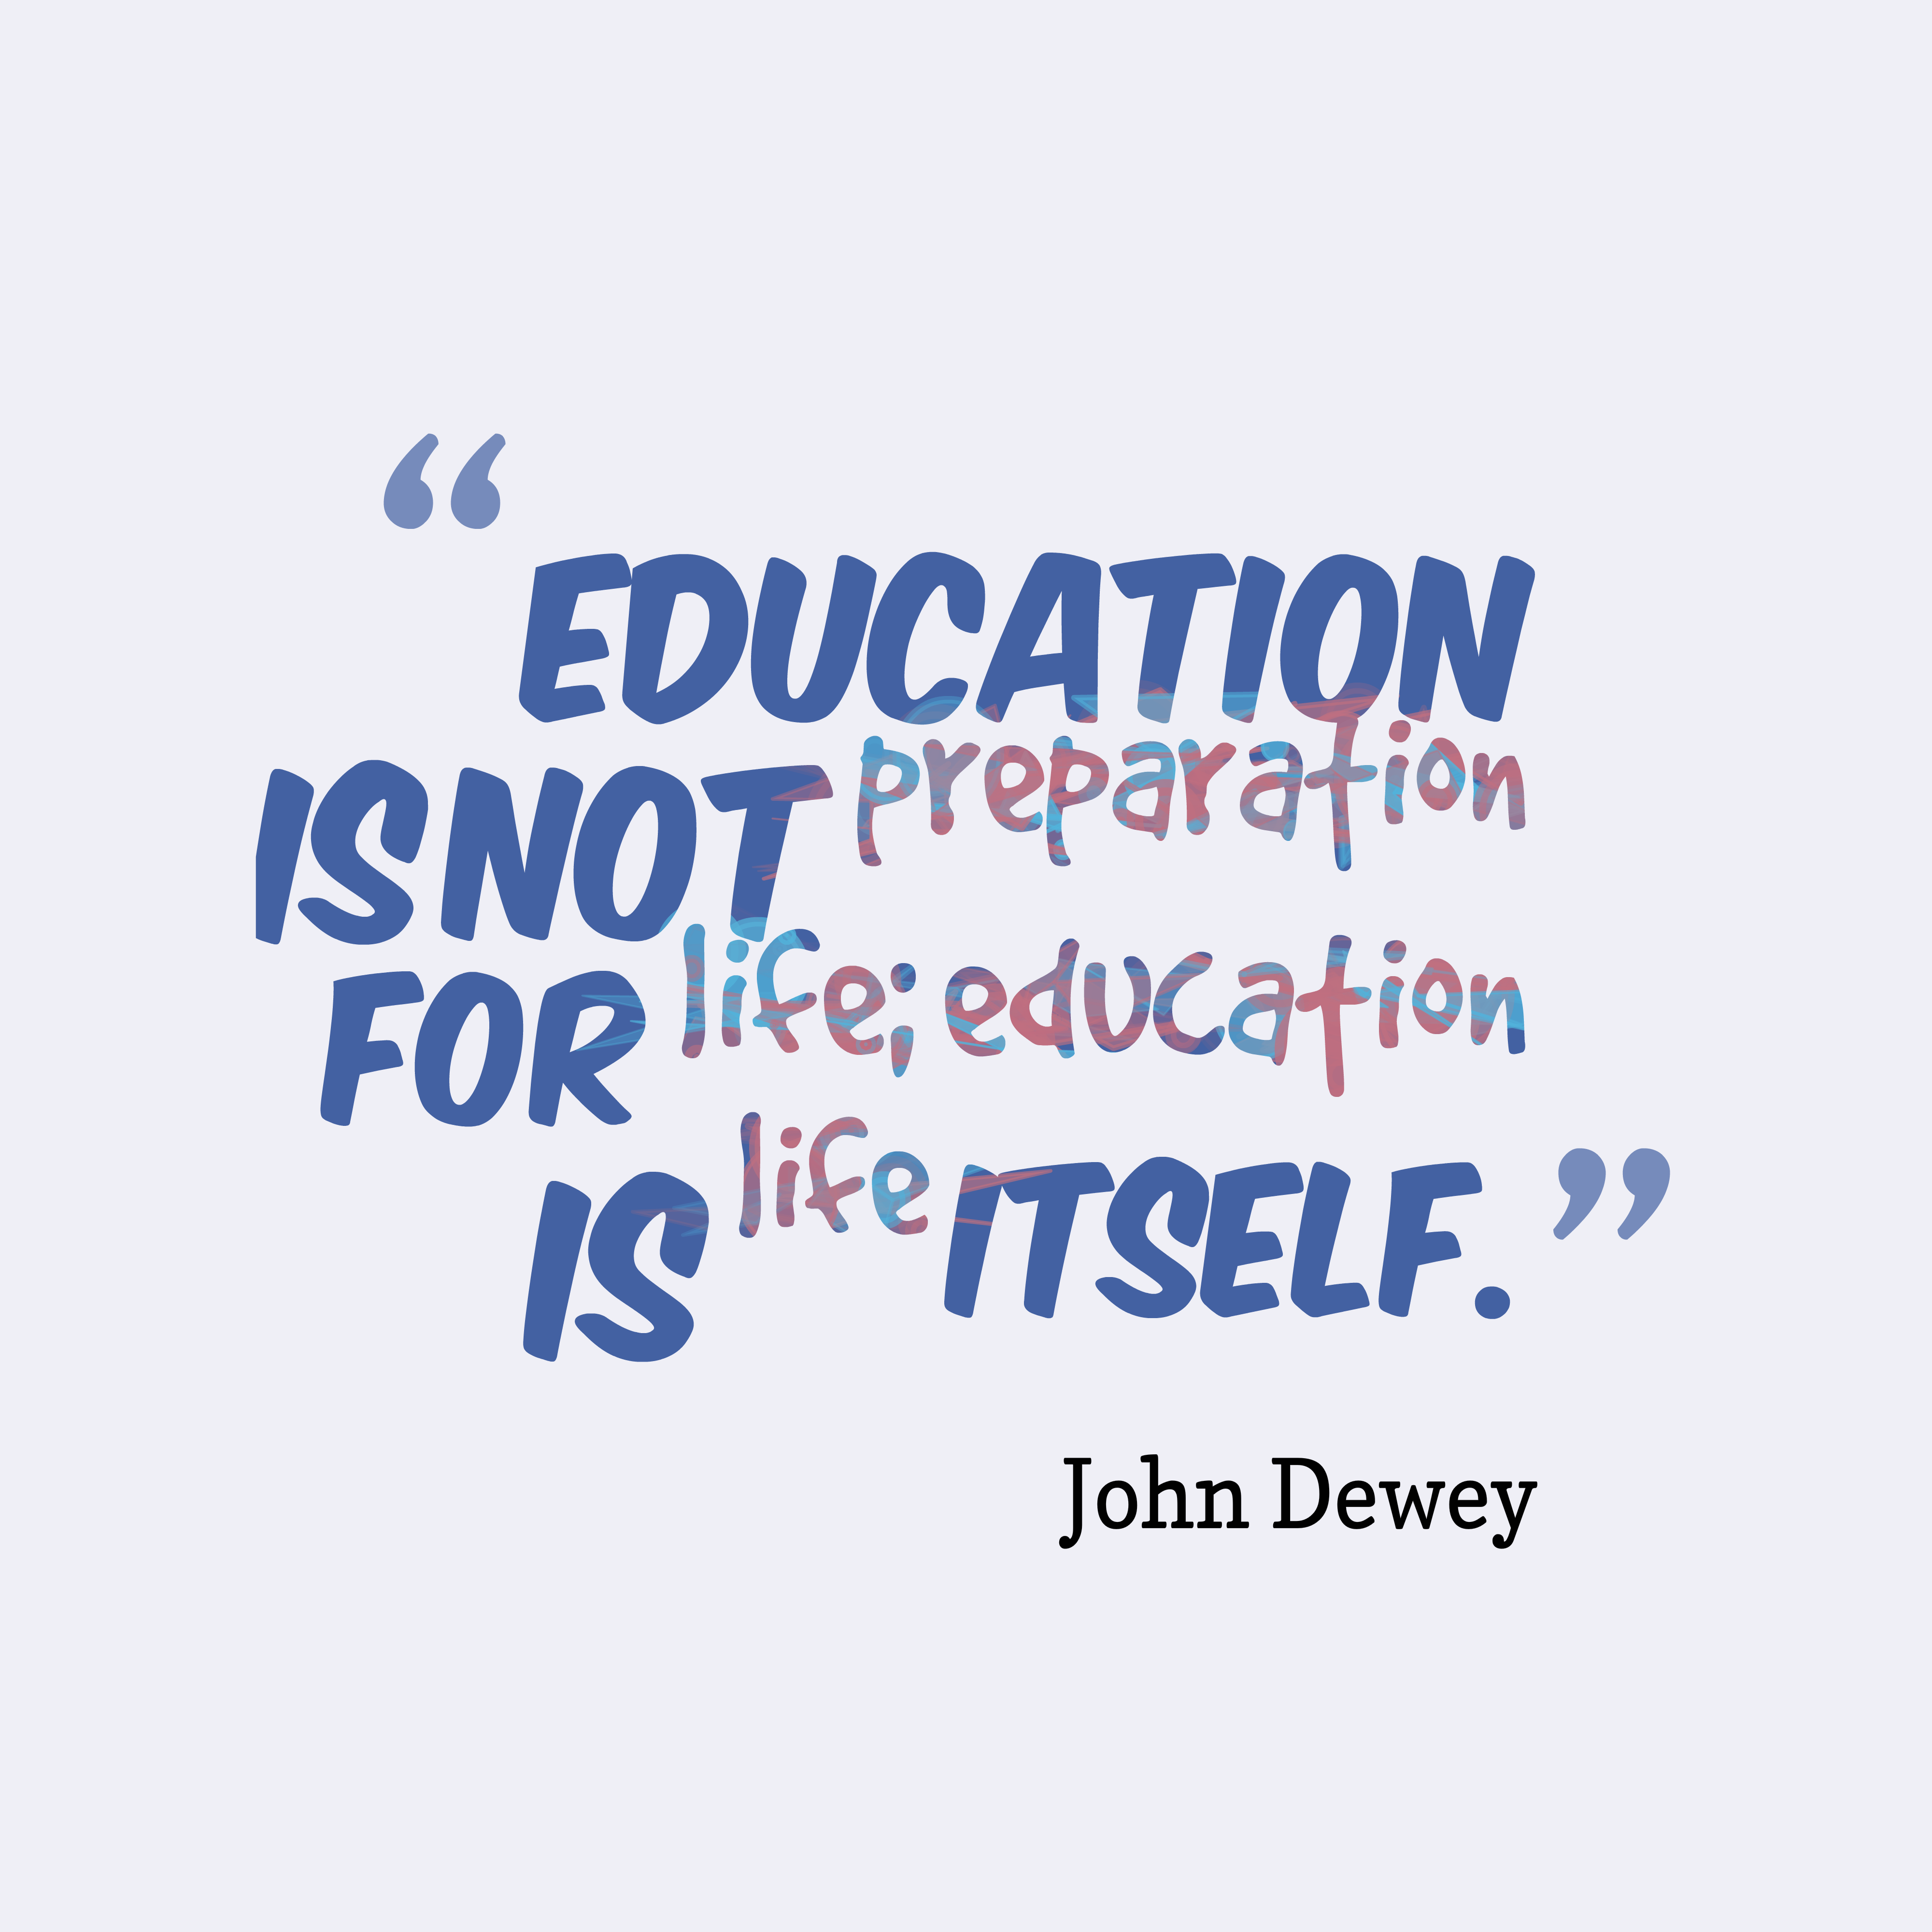 Education Is Not Preparation For Life; Education Is Life Itself.